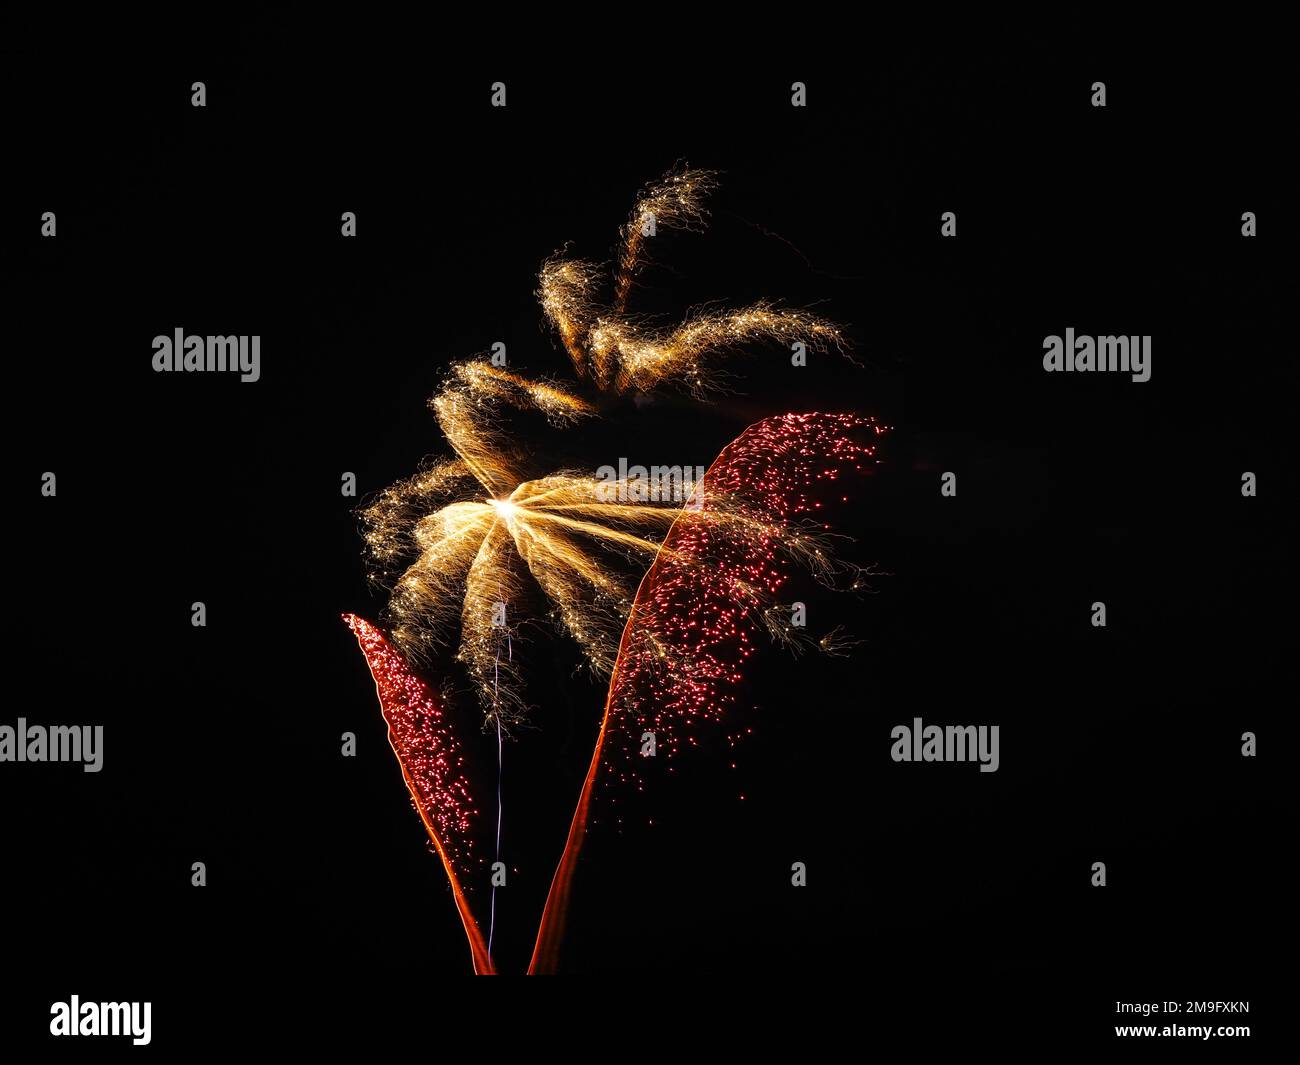 Fireworks against a black sky in a plant/flower/tree shape Stock Photo